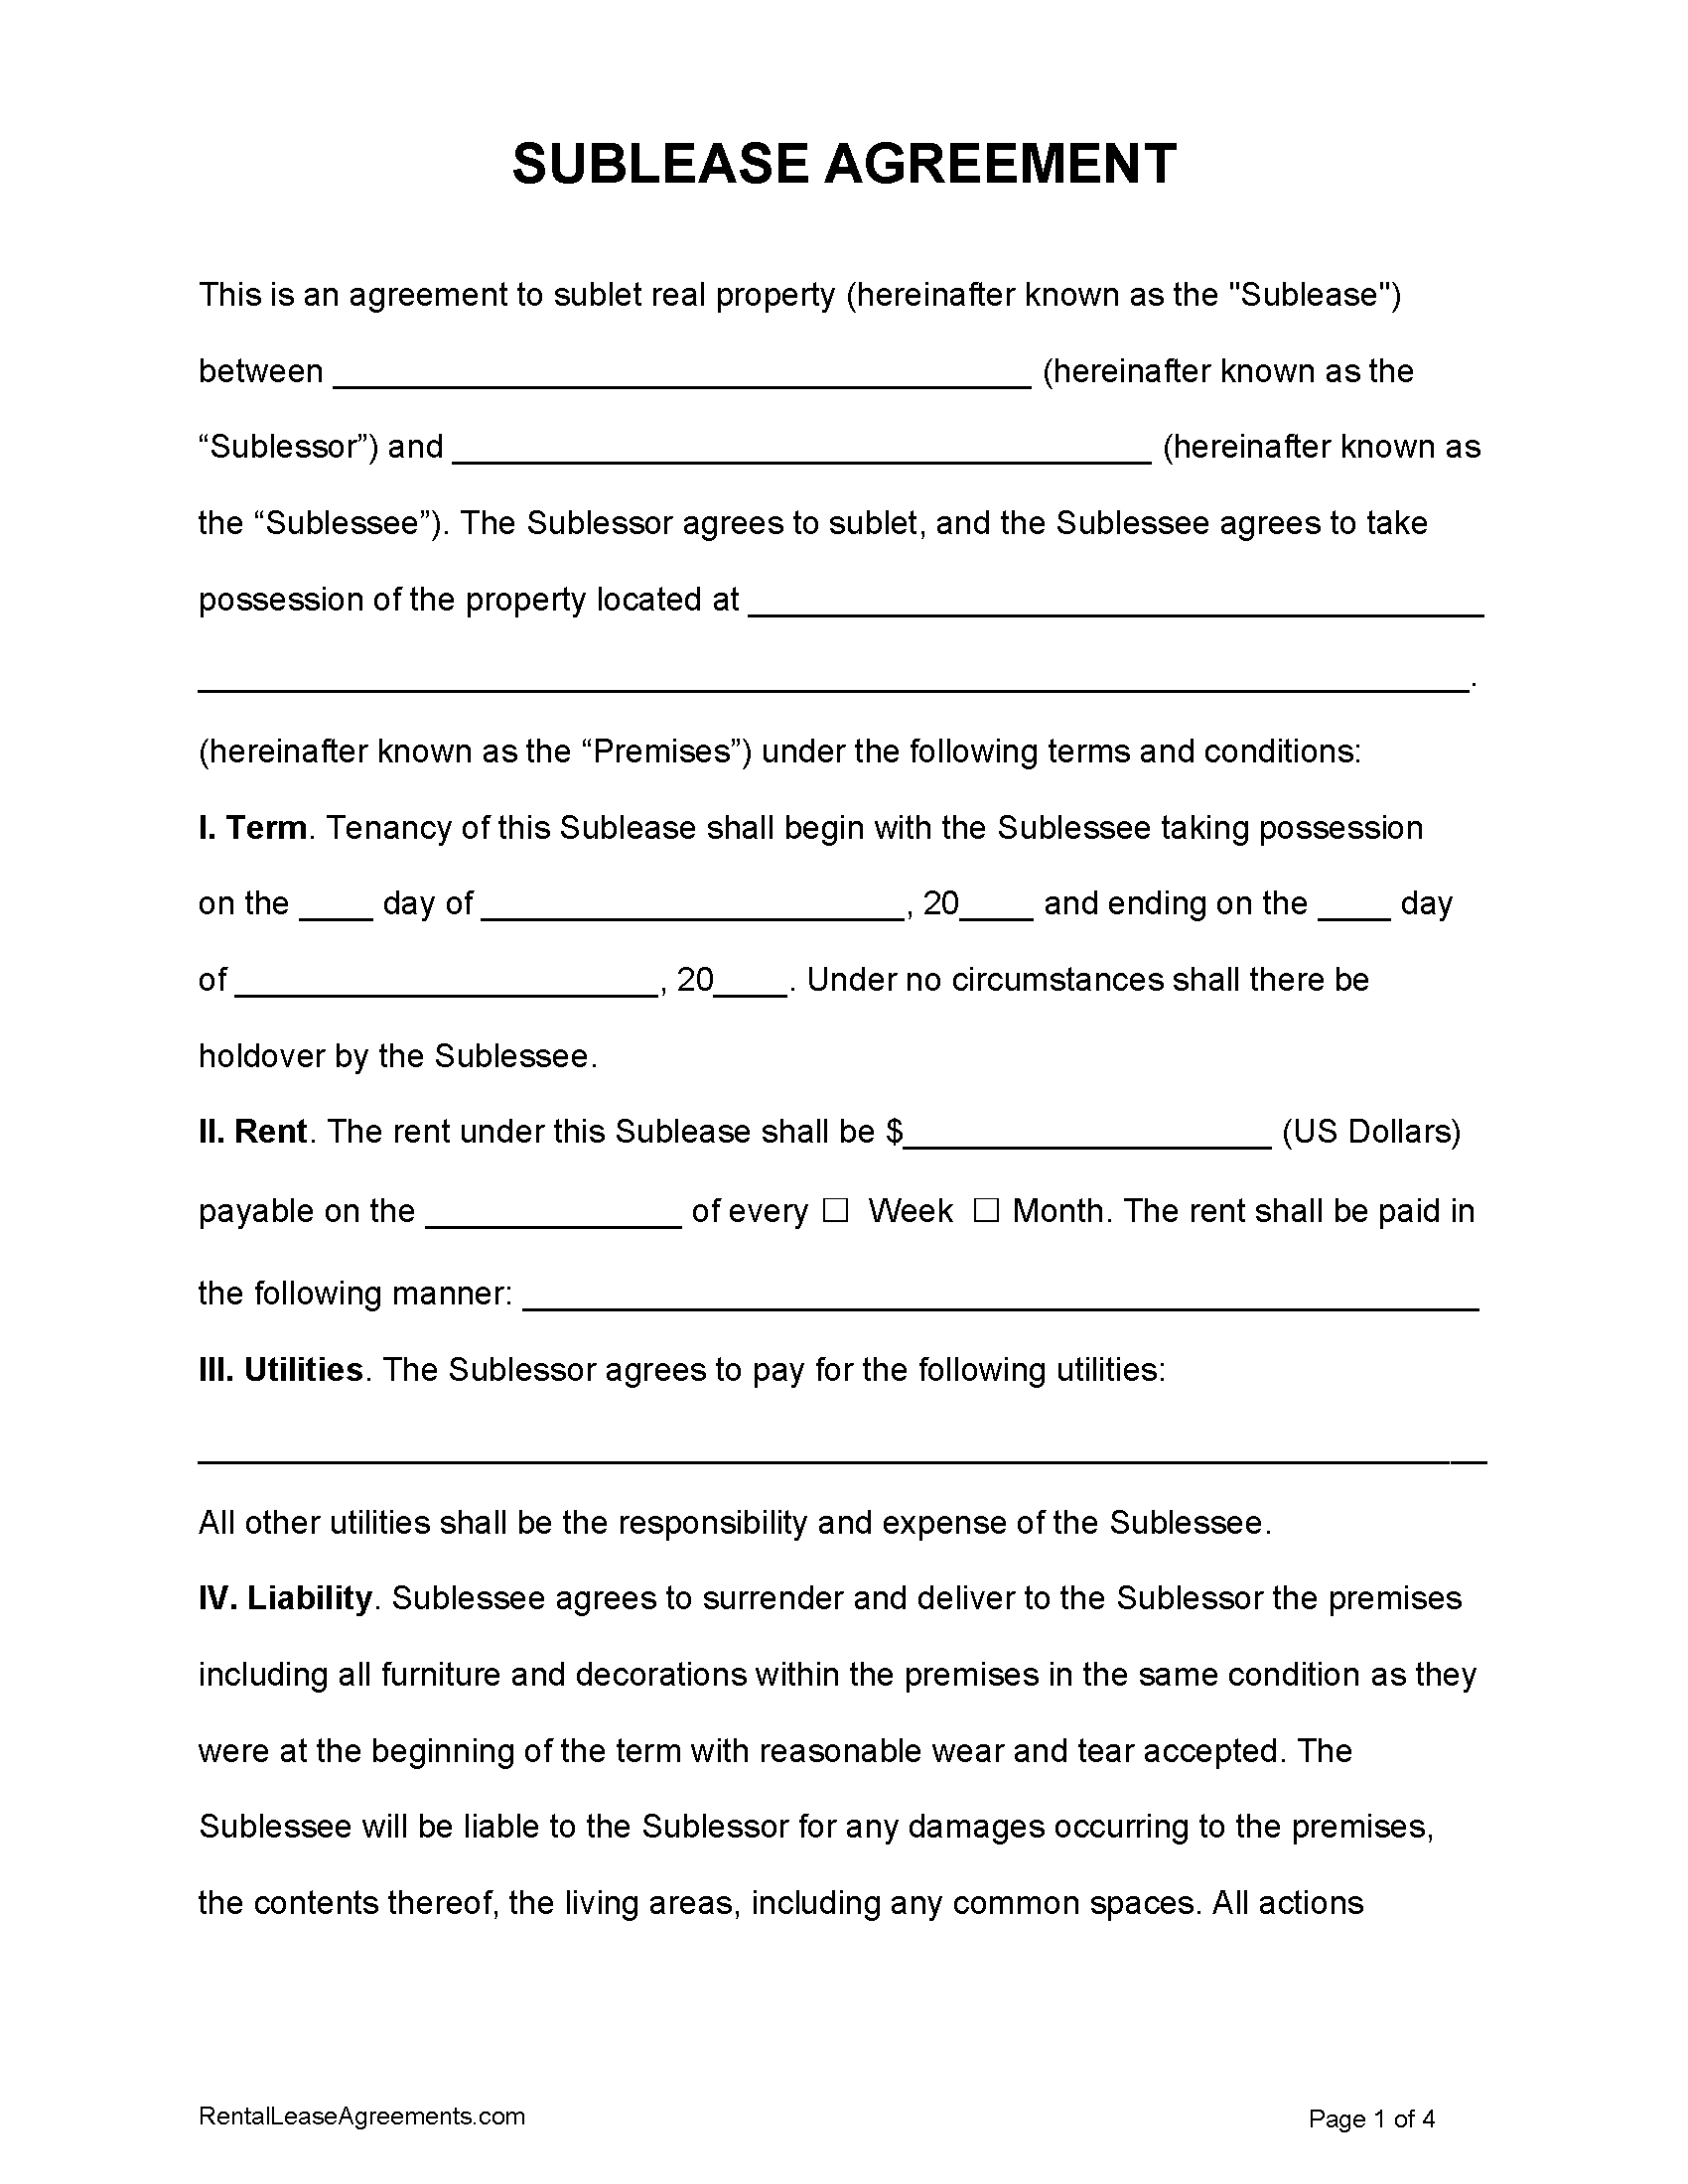 Free Sublease Agreement Template  PDF - Word Inside commercial kitchen rental agreement template